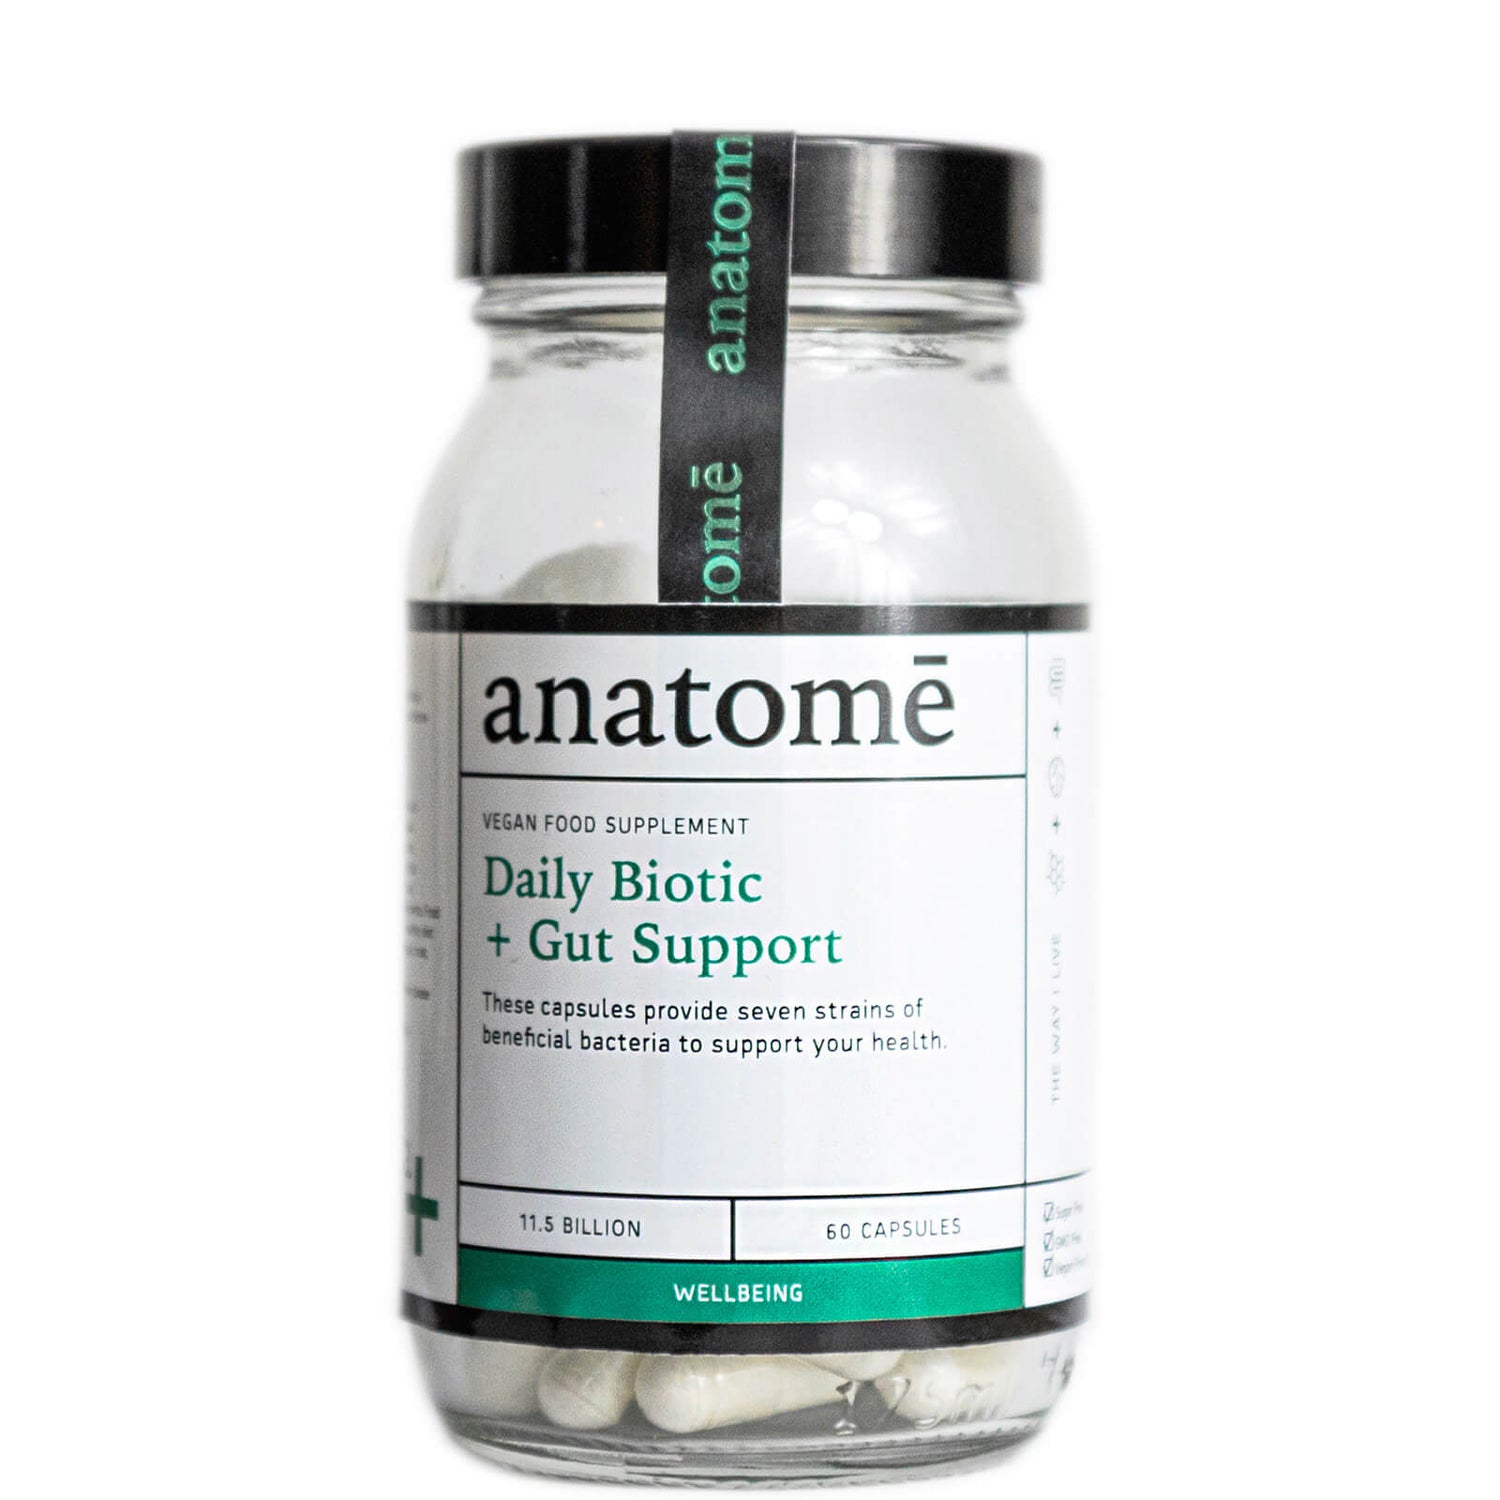 anatome Daily Biotic and Gut Support (60 Capsules)